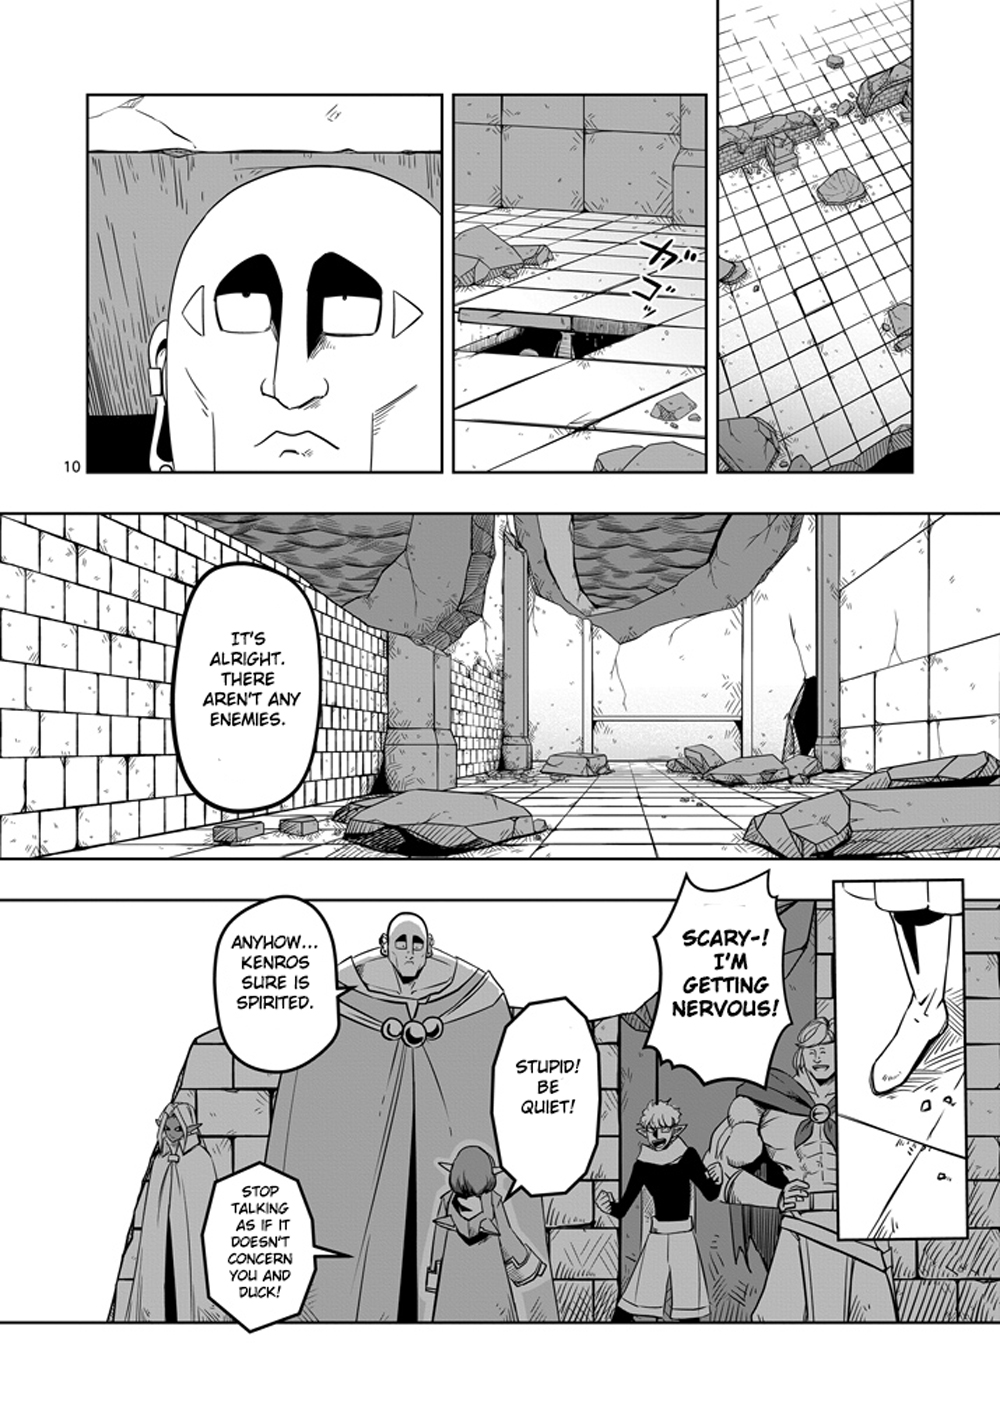 Helck Ch.9